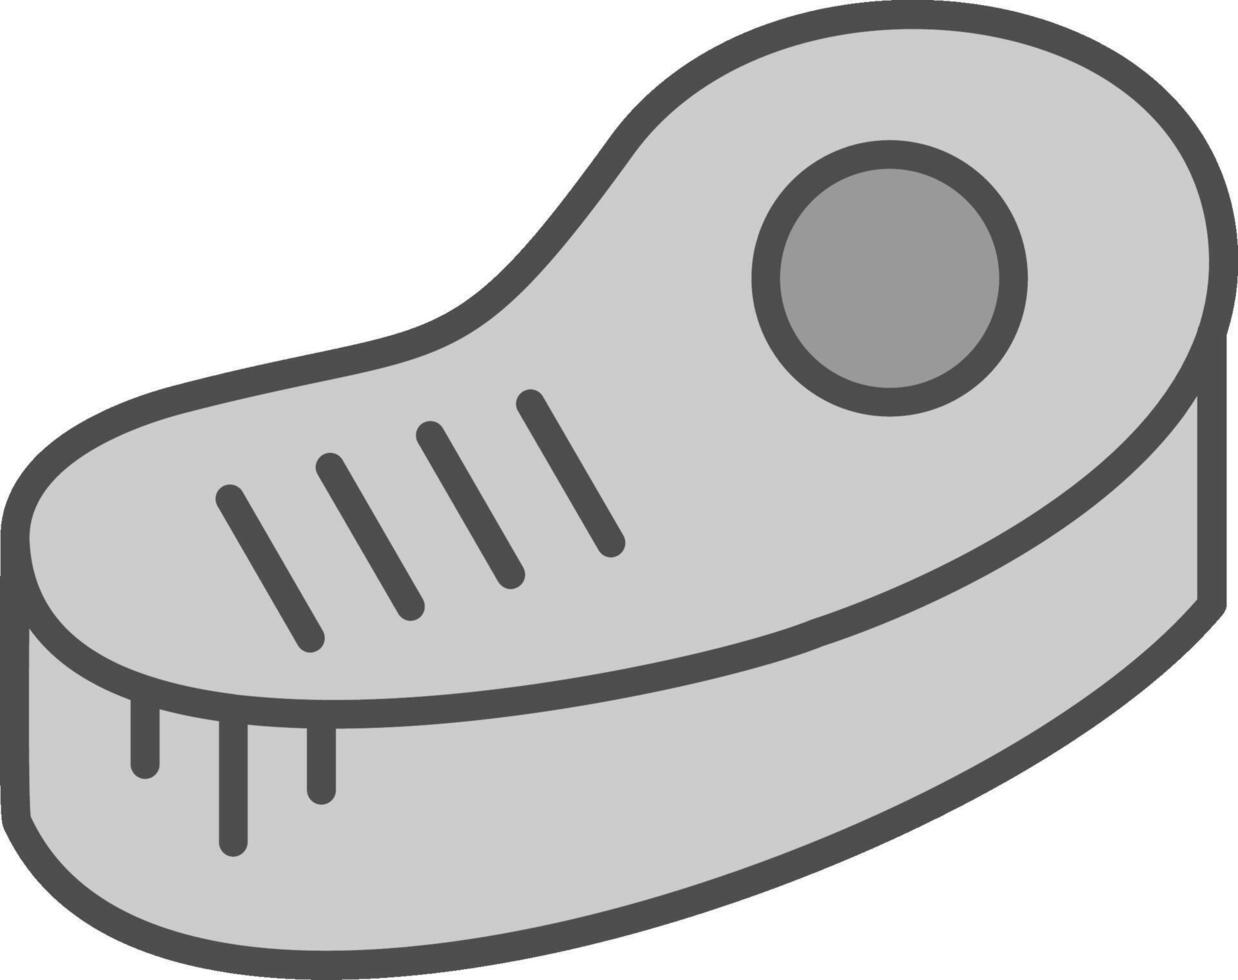 Steak Line Filled Greyscale Icon Design vector